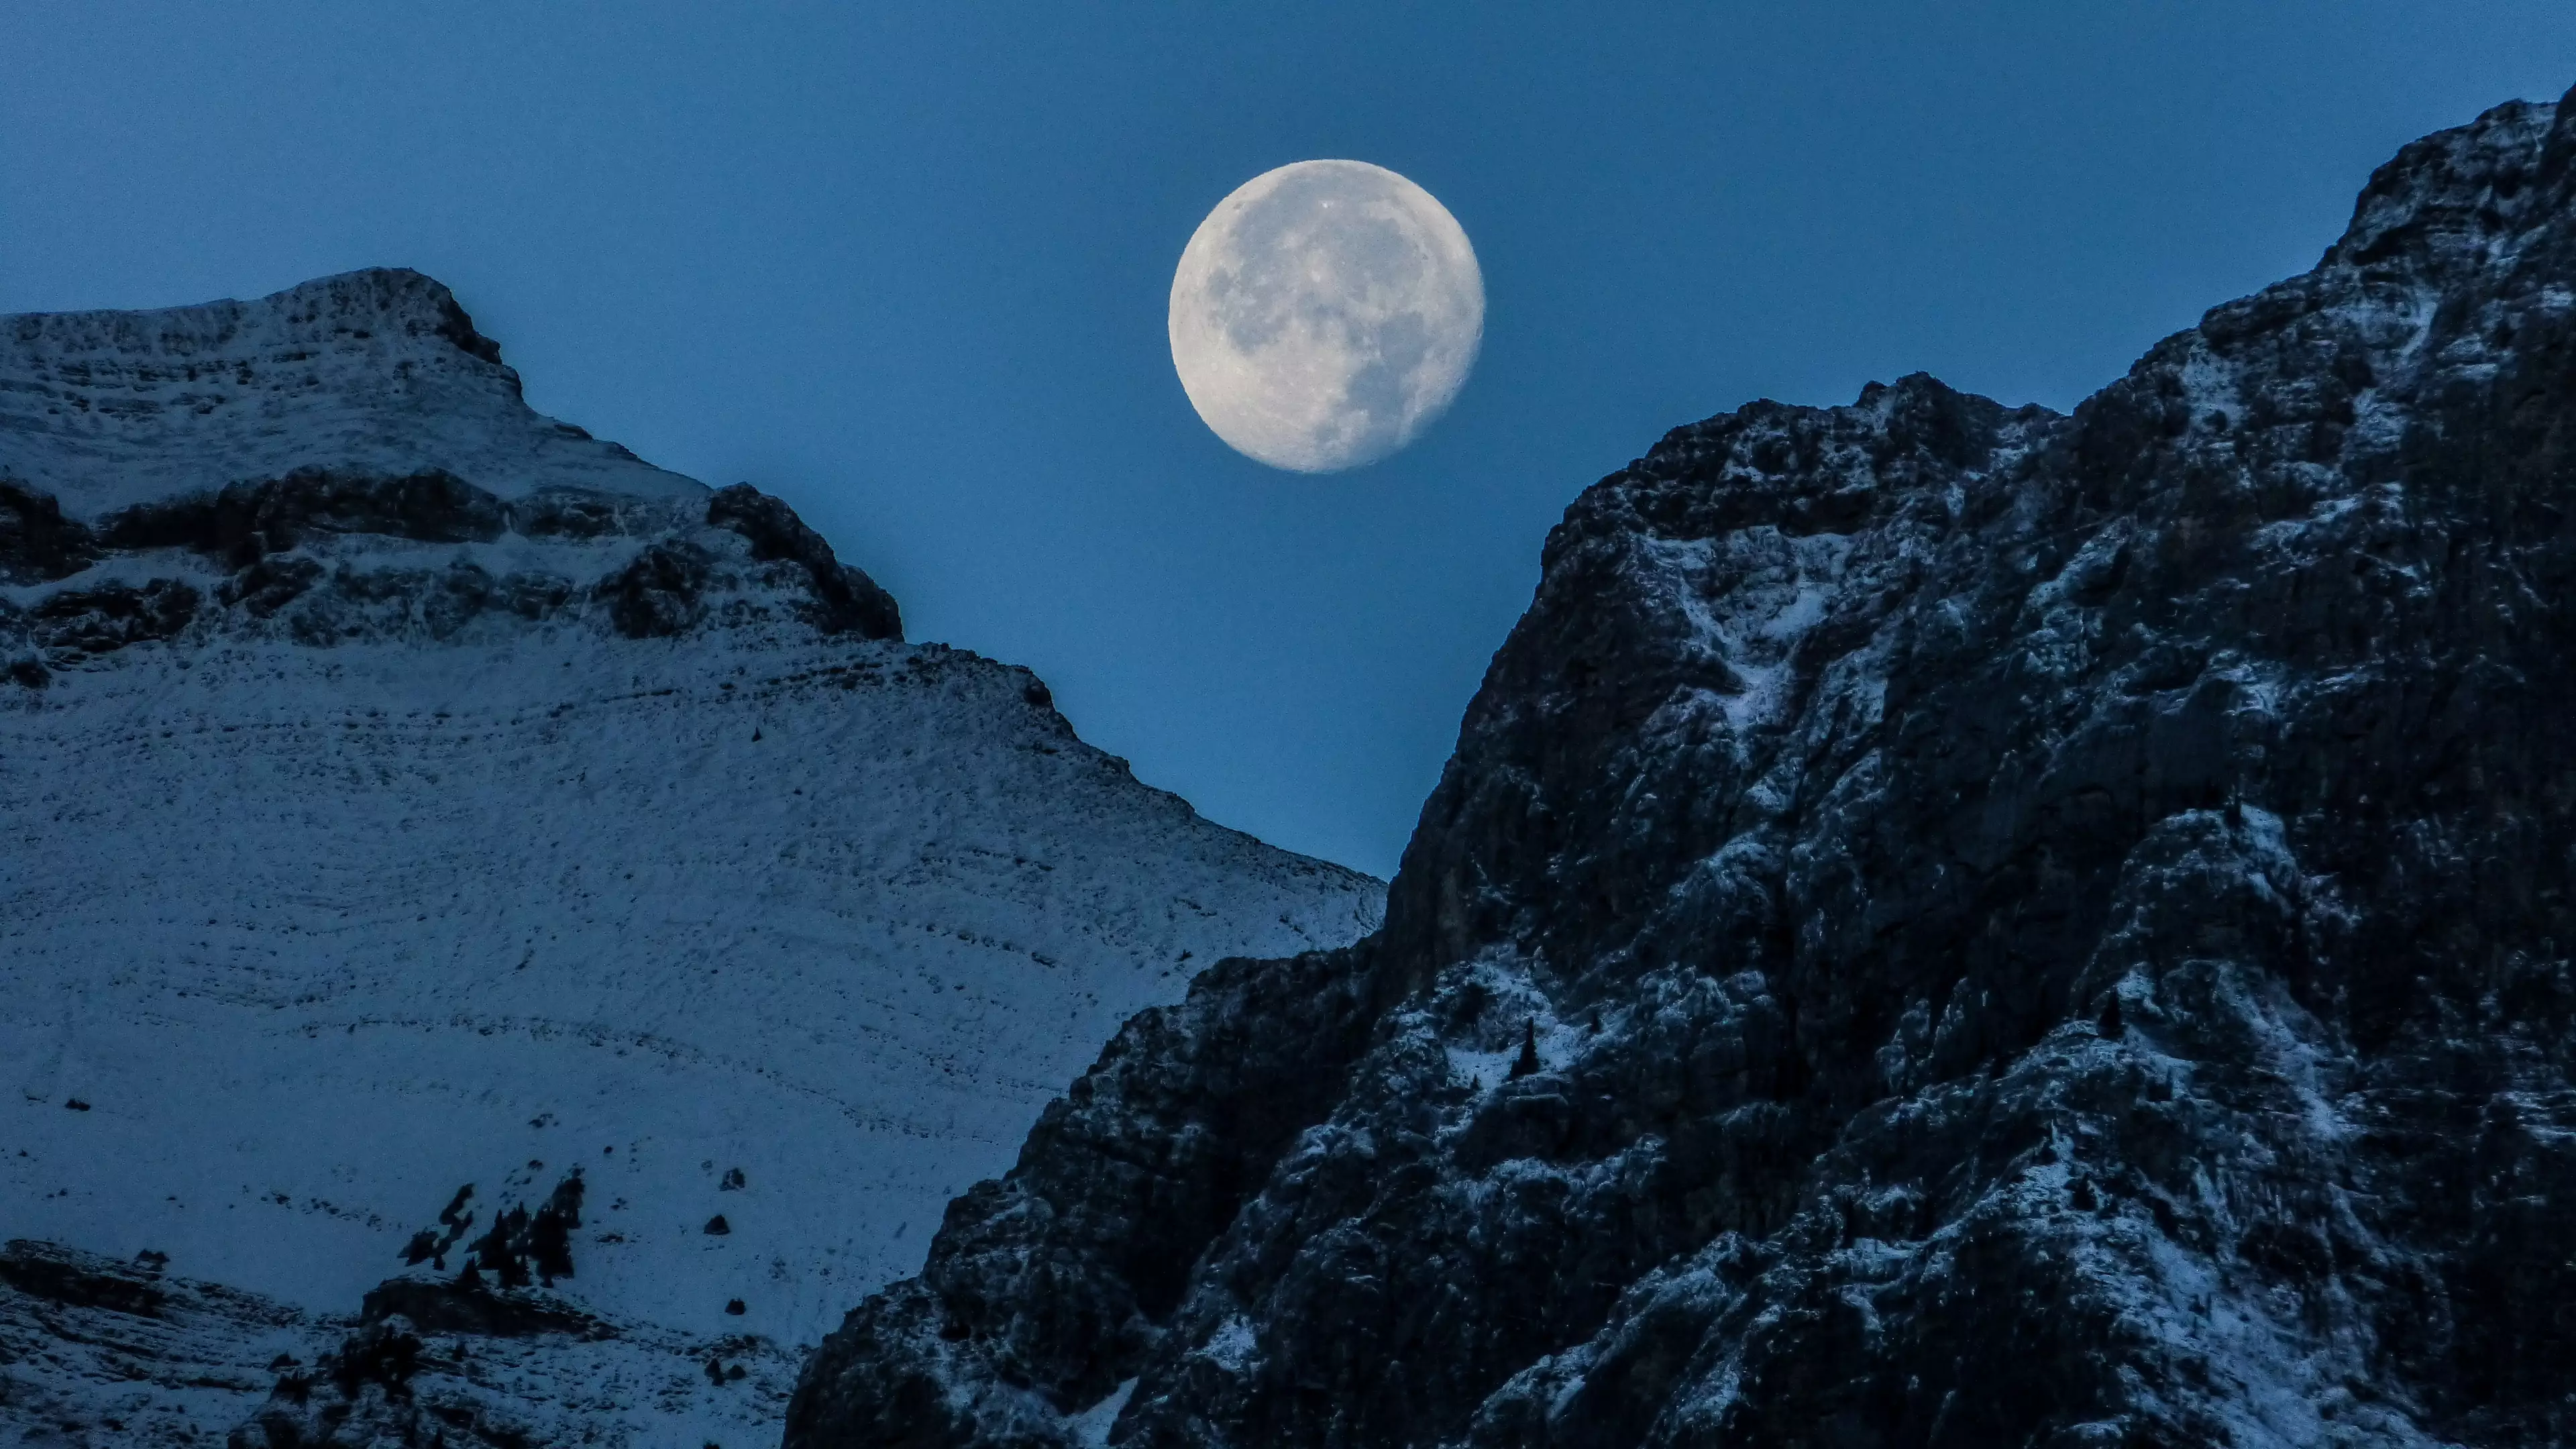 The Cold Moon is extra special because it sits just above the horizon for a longer period of time (